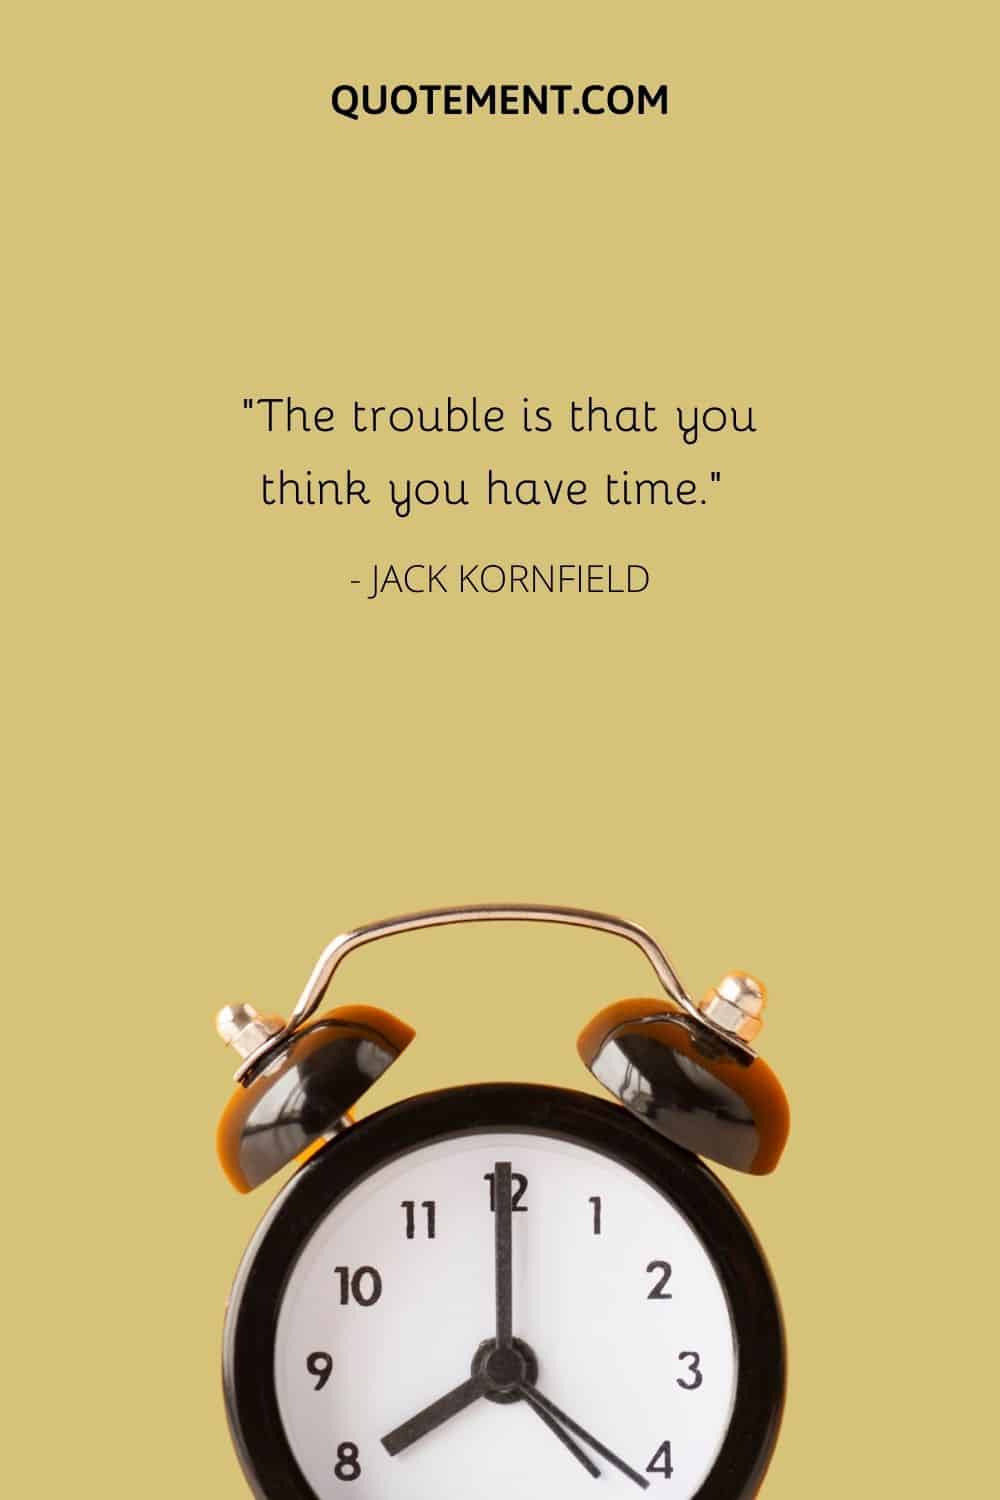 The trouble is that you think you have time